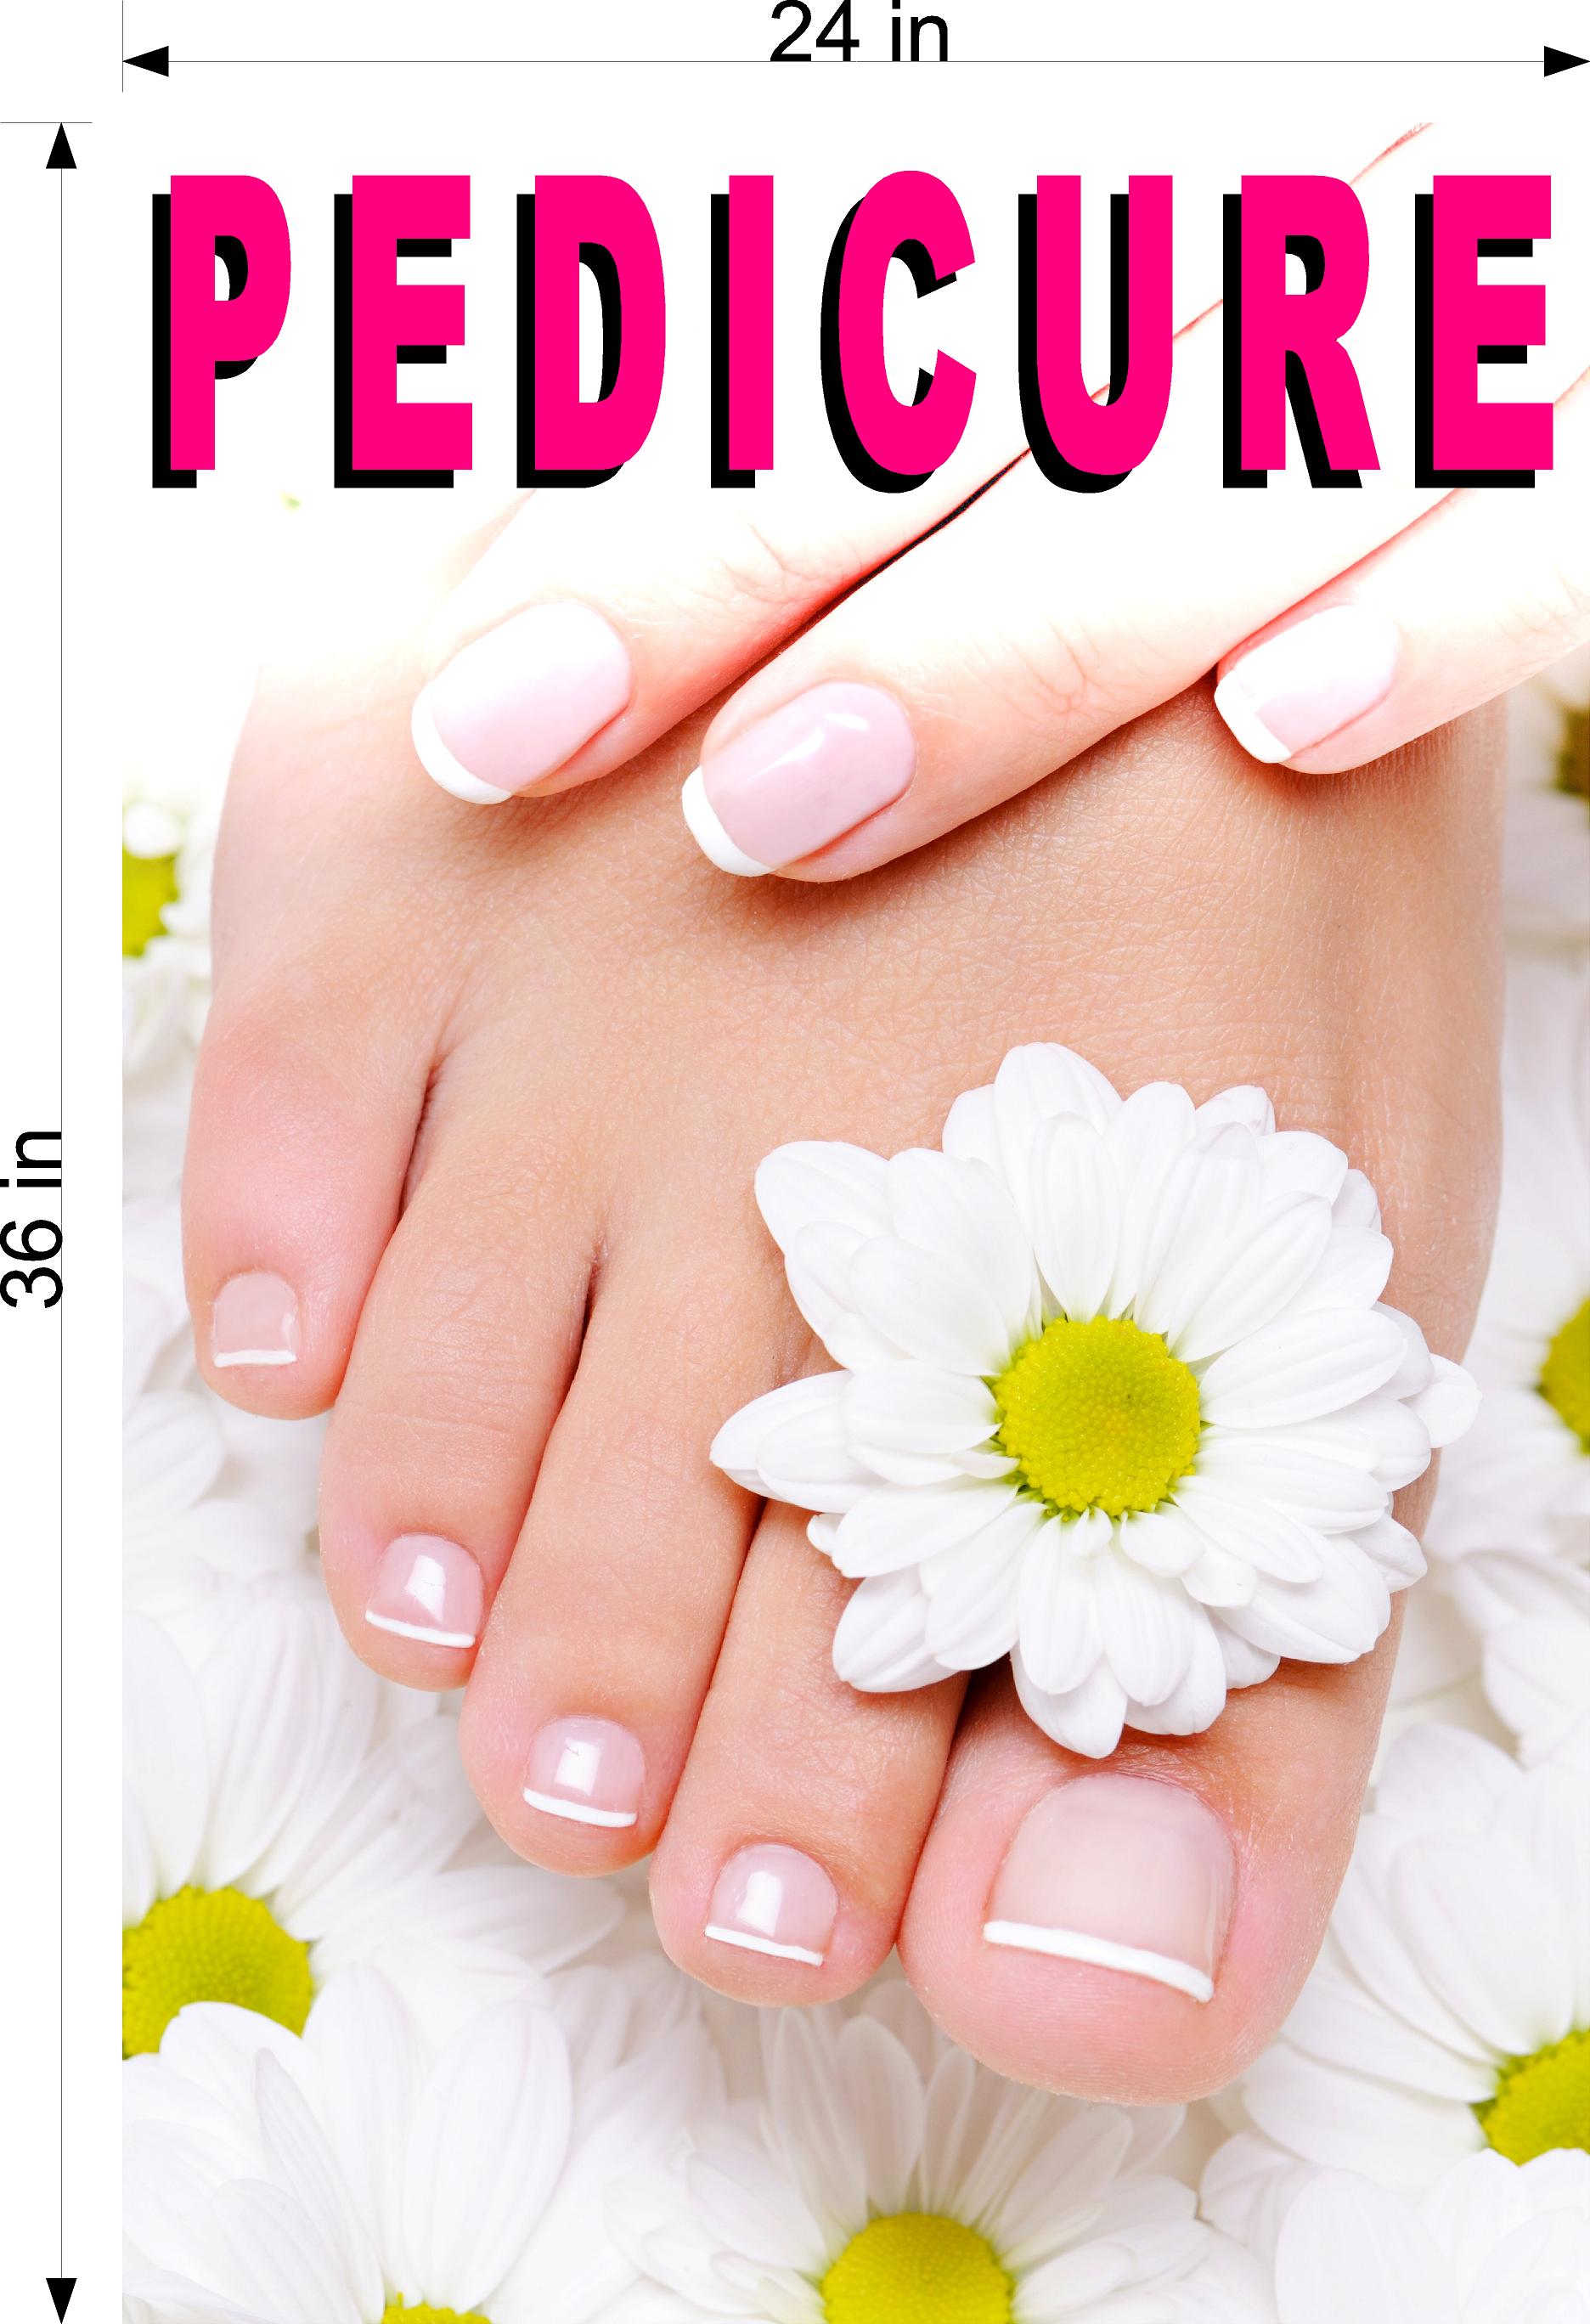 Pedicure 06 Wallpaper Poster Decal with Adhesive Backing Wall Sticker Decor Indoors Interior Sign Vertical